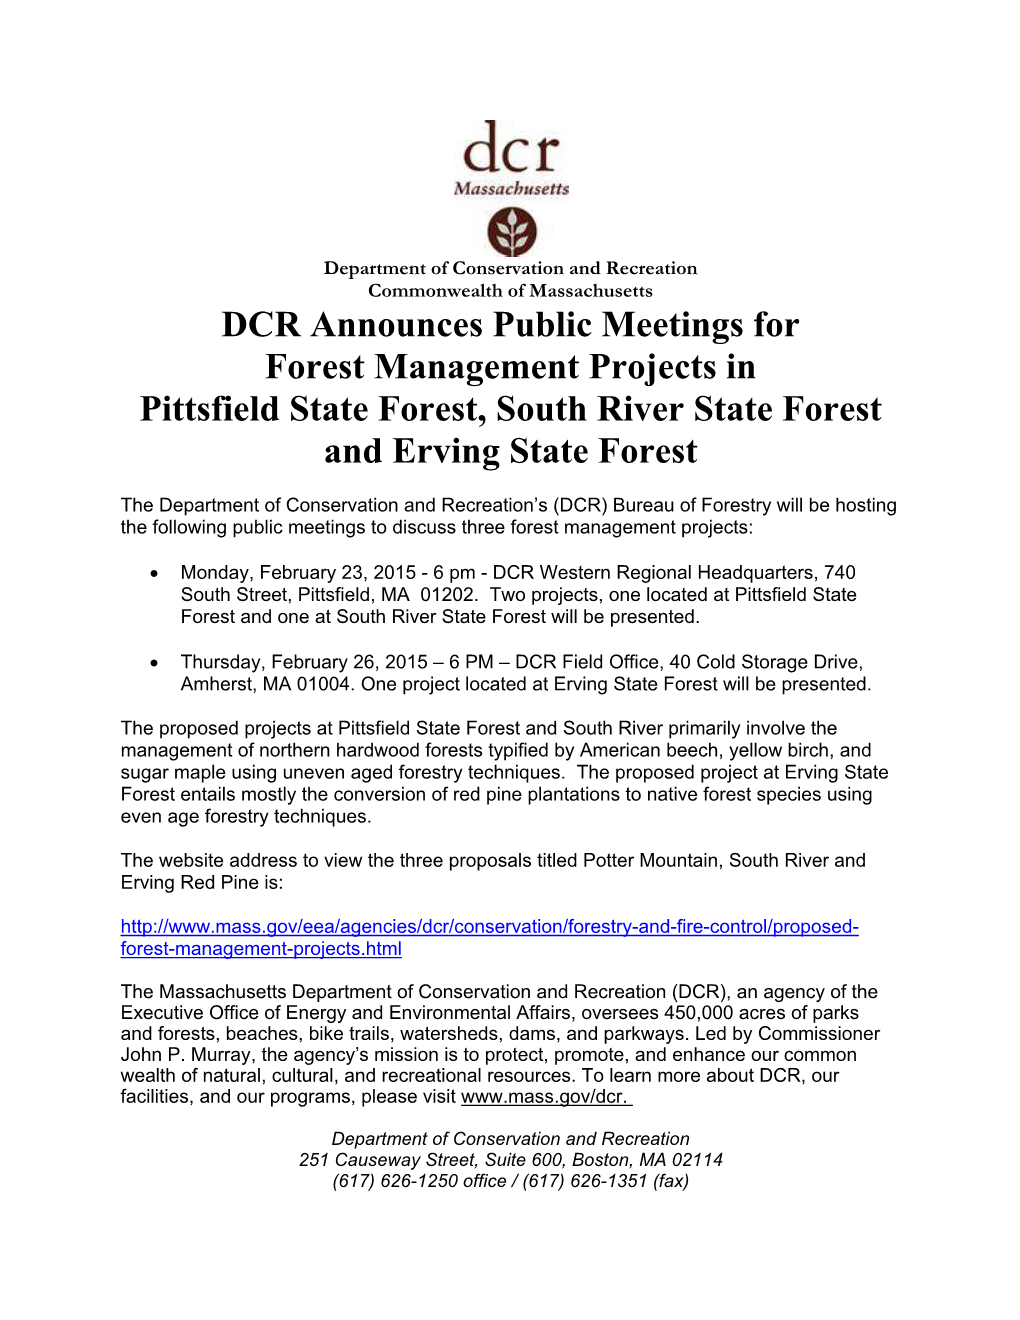 DCR Announces Public Meetings for Forest Management Projects in Pittsfield State Forest, South River State Forest and Erving State Forest